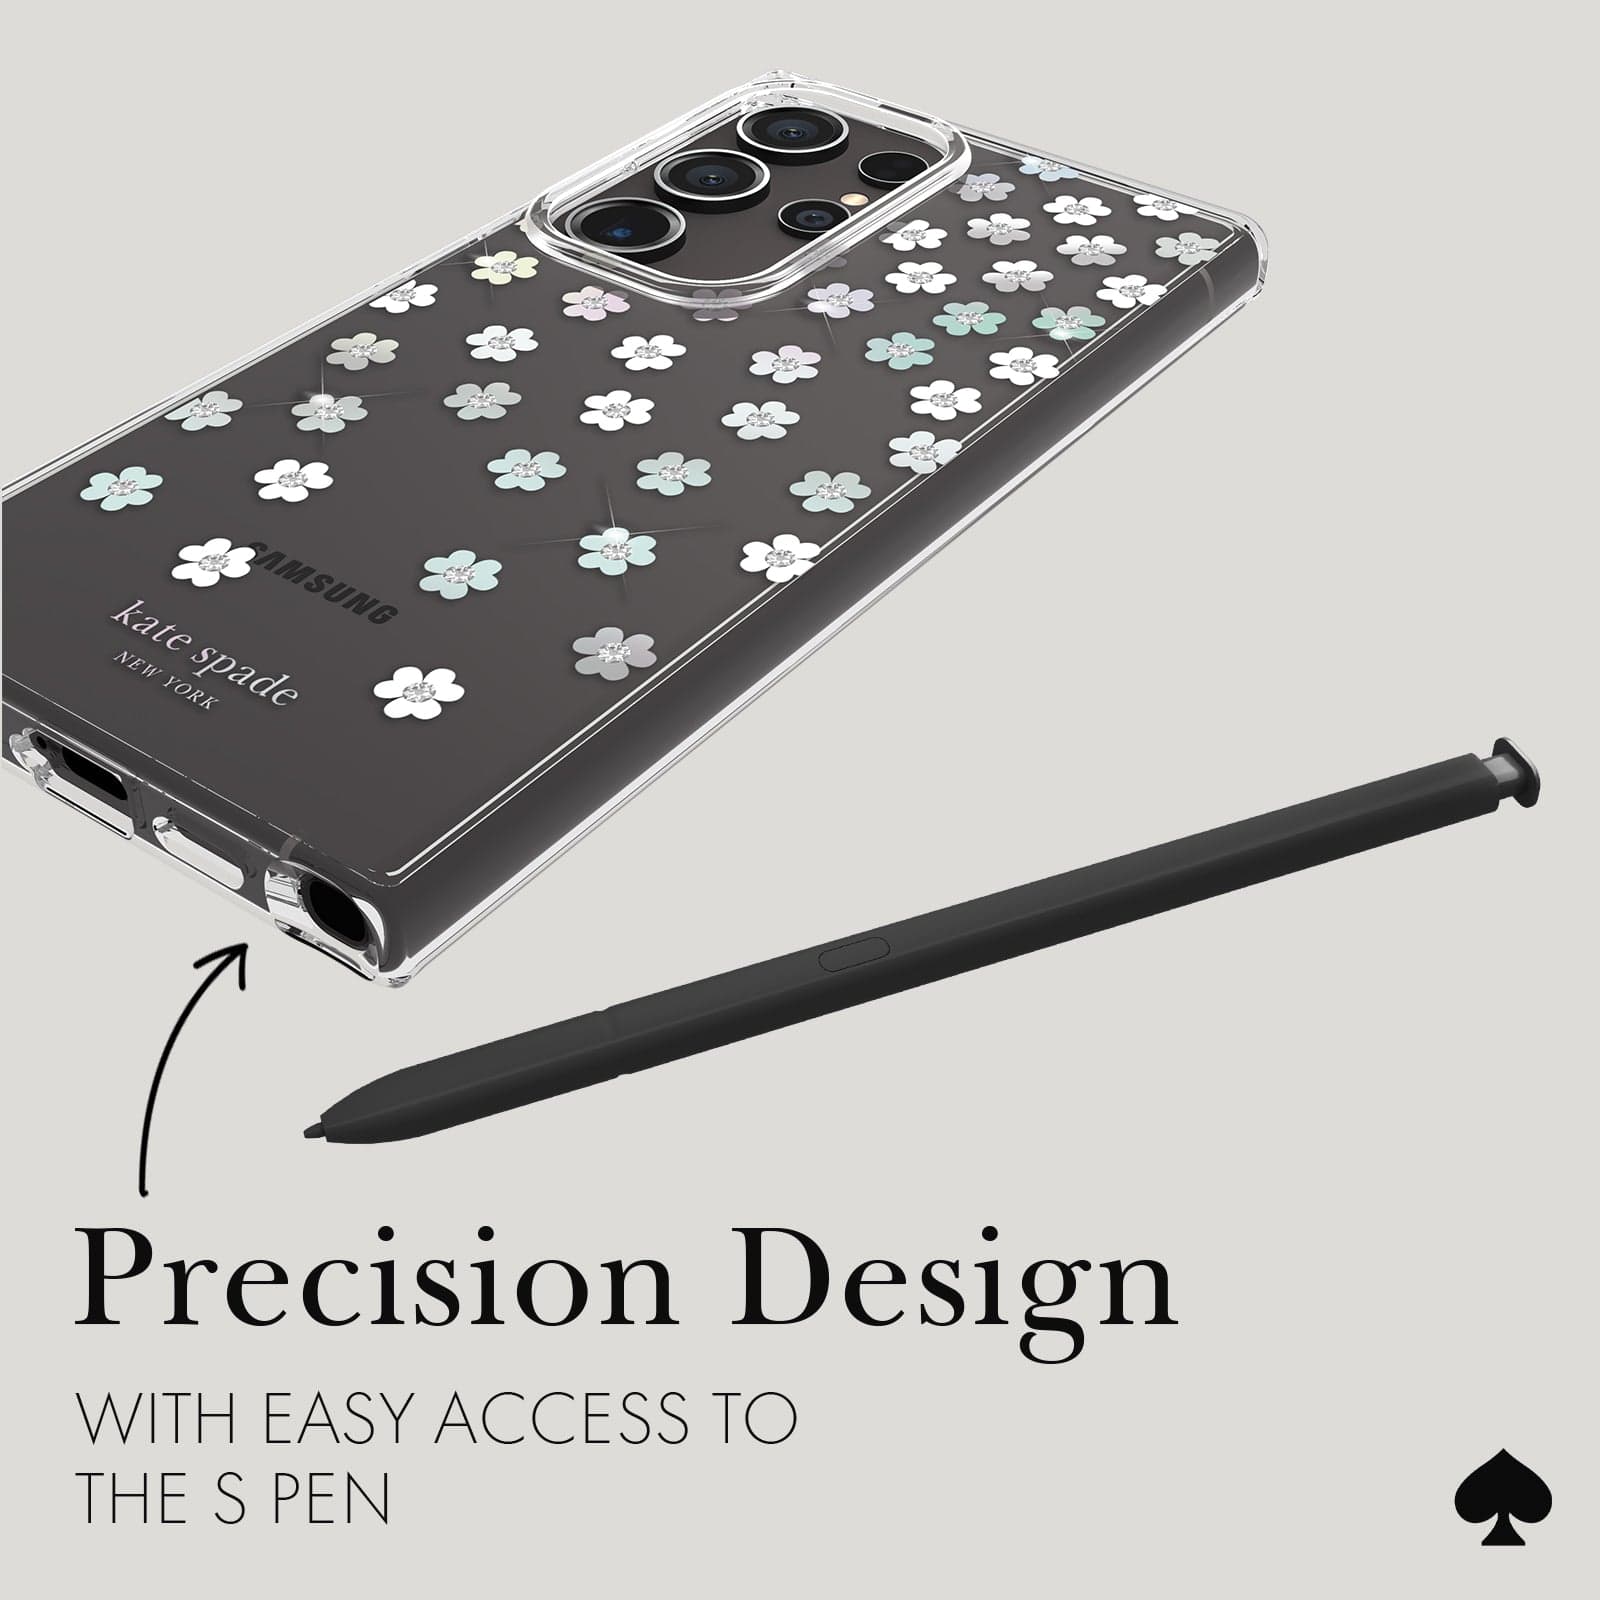 PRECISION DESIGN WITH EASY ACCESS TO THE S PEN